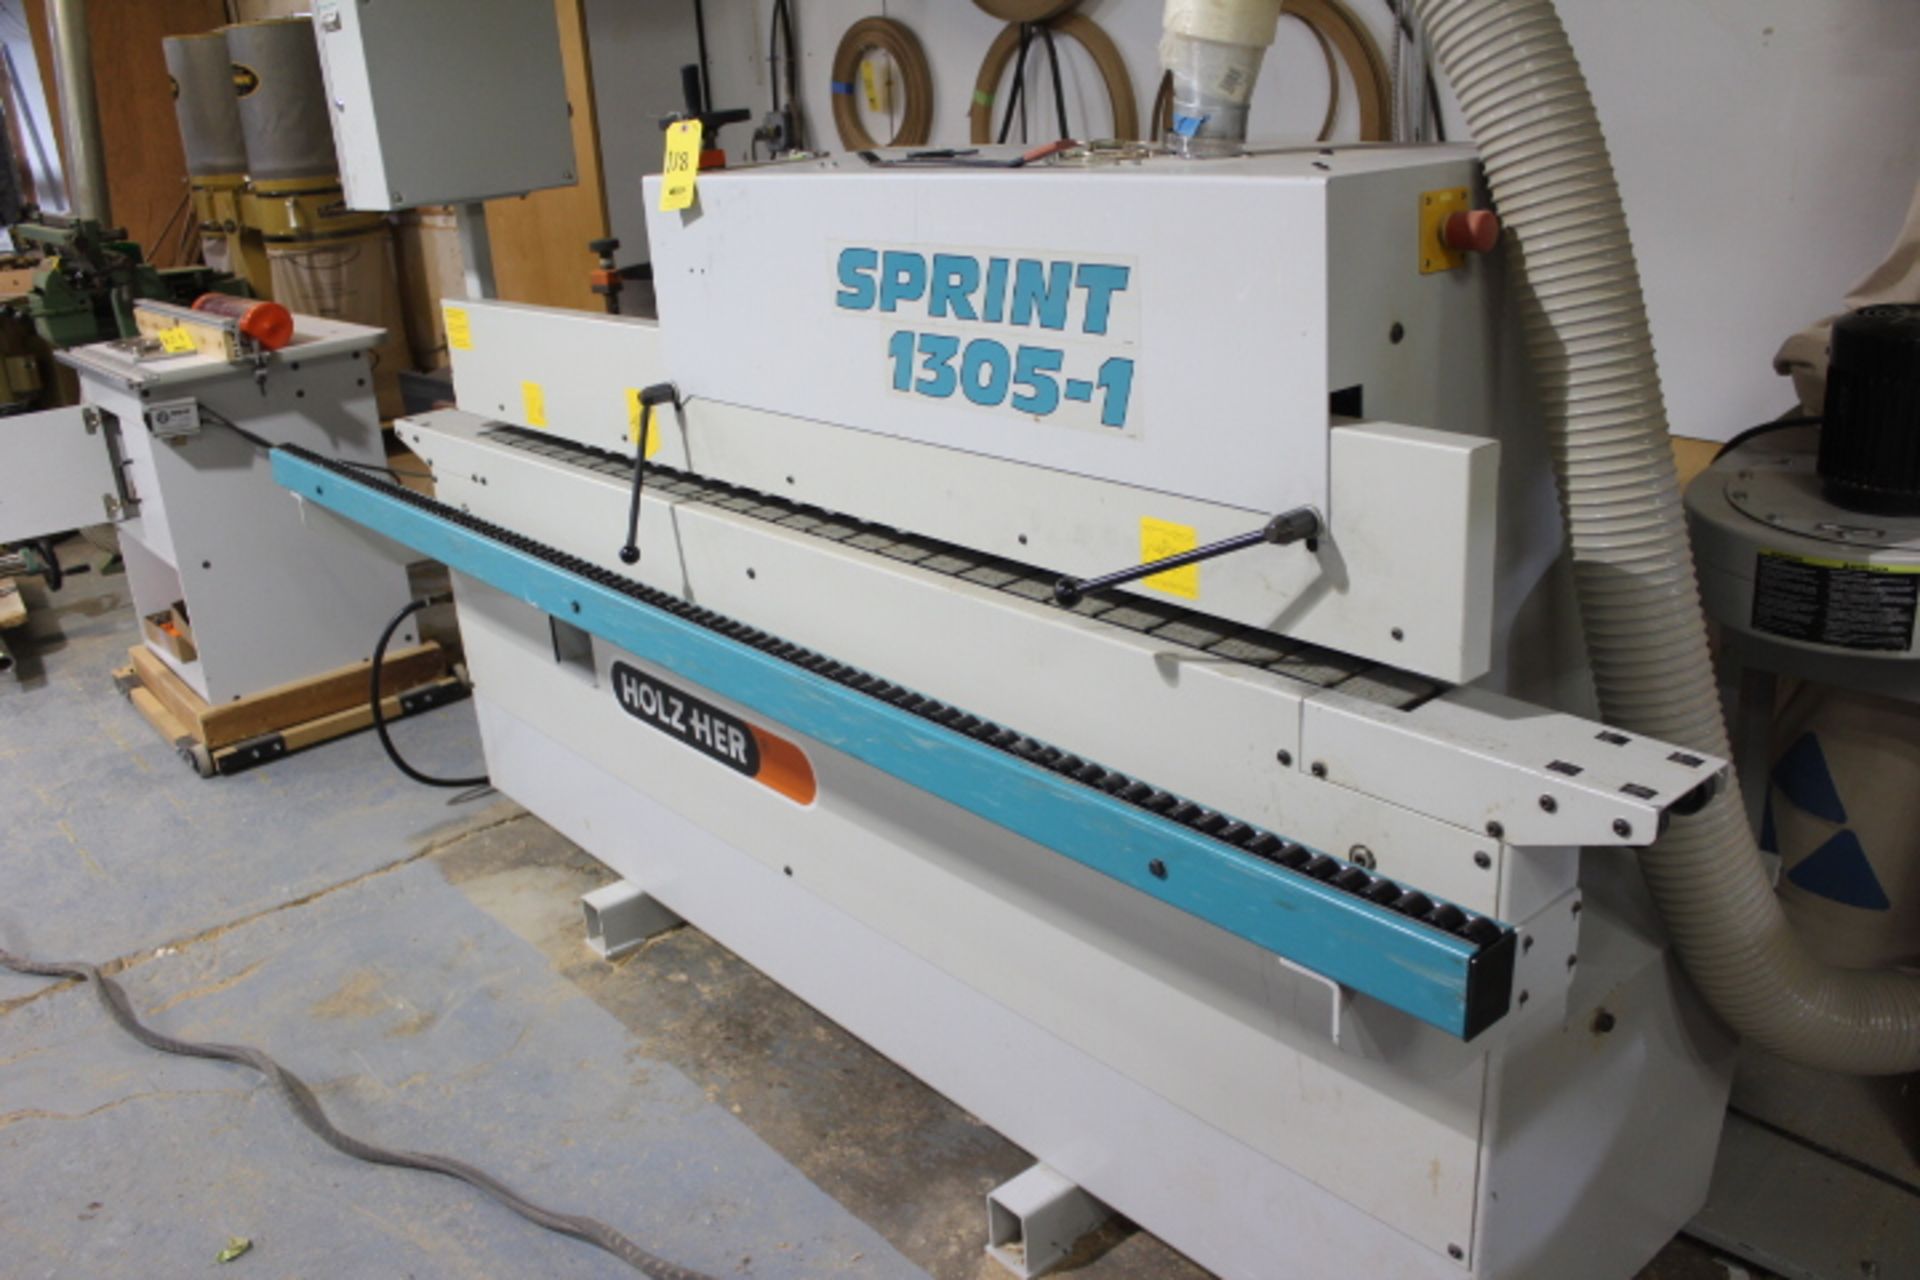 2003 HOLZHER SPRINT 1305-1 SINGLE SIDED EDGE BANDER, S/N 521/0-308, 3 MM EDGE THICKNESS… - Image 4 of 5